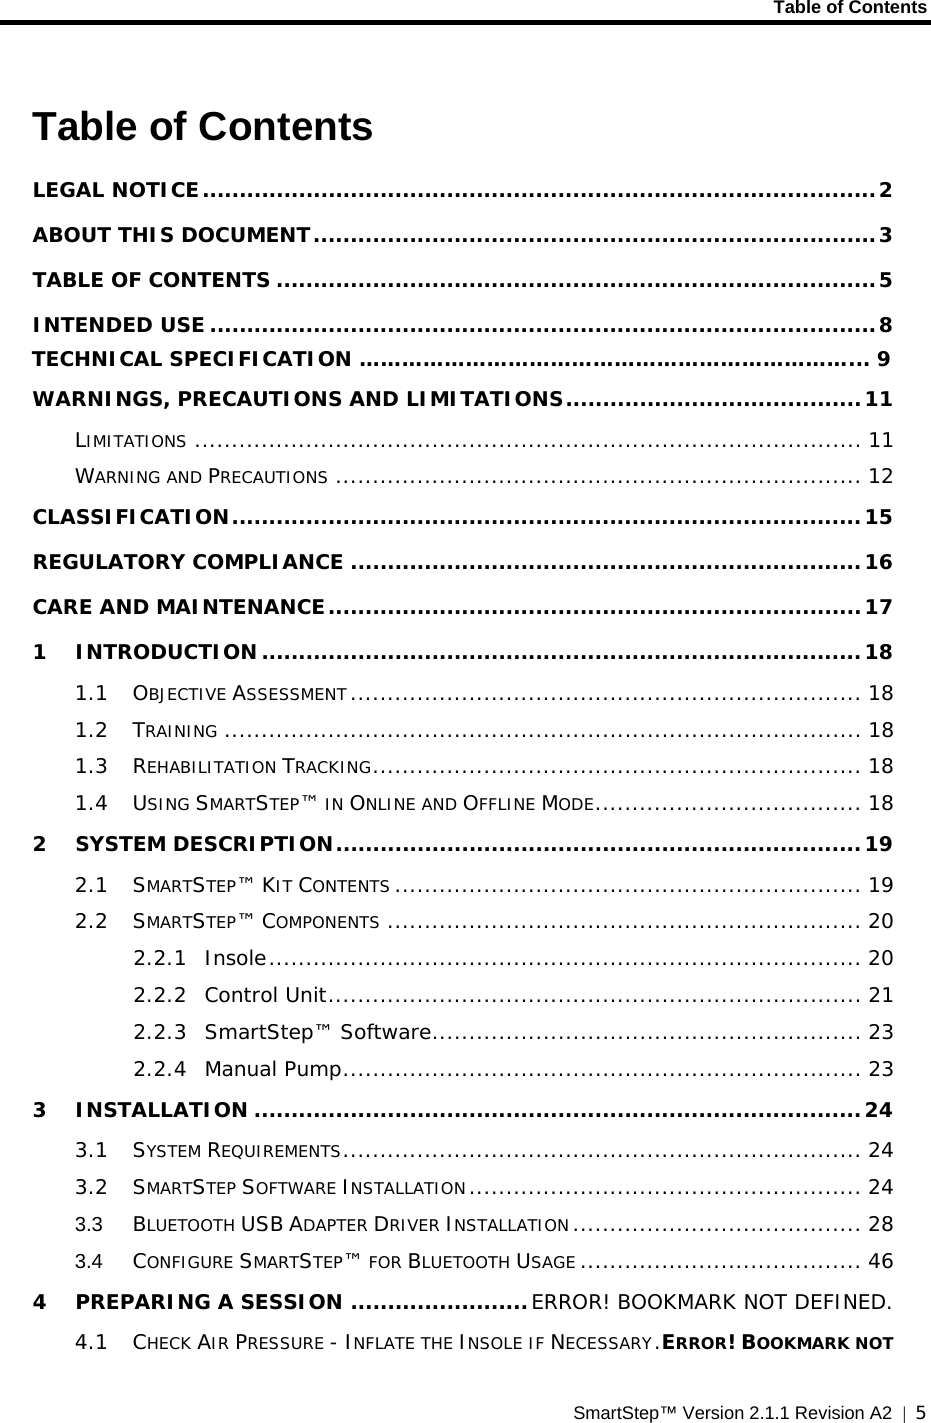     Table of Contents  SmartStep™ Version 2.1.1 Revision A2  |  5  Table of Contents LEGAL NOTICE...........................................................................................2 ABOUT THIS DOCUMENT............................................................................3 TABLE OF CONTENTS .................................................................................5 INTENDED USE..........................................................................................8     TECHNICAL SPECIFICATION ……………………………………………………………... 9 WARNINGS, PRECAUTIONS AND LIMITATIONS........................................11 LIMITATIONS .......................................................................................... 11 WARNING AND PRECAUTIONS ....................................................................... 12 CLASSIFICATION.....................................................................................15 REGULATORY COMPLIANCE .....................................................................16 CARE AND MAINTENANCE........................................................................17 1 INTRODUCTION.................................................................................18 1.1 OBJECTIVE ASSESSMENT ..................................................................... 18 1.2 TRAINING ...................................................................................... 18 1.3 REHABILITATION TRACKING.................................................................. 18 1.4 USING SMARTSTEP™ IN ONLINE AND OFFLINE MODE.................................... 18 2 SYSTEM DESCRIPTION.......................................................................19 2.1 SMARTSTEP™ KIT CONTENTS ............................................................... 19 2.2 SMARTSTEP™ COMPONENTS ................................................................ 20 2.2.1 Insole................................................................................ 20 2.2.2 Control Unit........................................................................ 21 2.2.3 SmartStep™ Software.......................................................... 23 2.2.4 Manual Pump...................................................................... 23 3 INSTALLATION ..................................................................................24 3.1 SYSTEM REQUIREMENTS...................................................................... 24 3.2 SMARTSTEP SOFTWARE INSTALLATION..................................................... 24 3.3 BLUETOOTH USB ADAPTER DRIVER INSTALLATION....................................... 28 3.4 CONFIGURE SMARTSTEP™ FOR BLUETOOTH USAGE ...................................... 46 4 PREPARING A SESSION ........................ERROR! BOOKMARK NOT DEFINED. 4.1 CHECK AIR PRESSURE - INFLATE THE INSOLE IF NECESSARY.ERROR! BOOKMARK NOT 